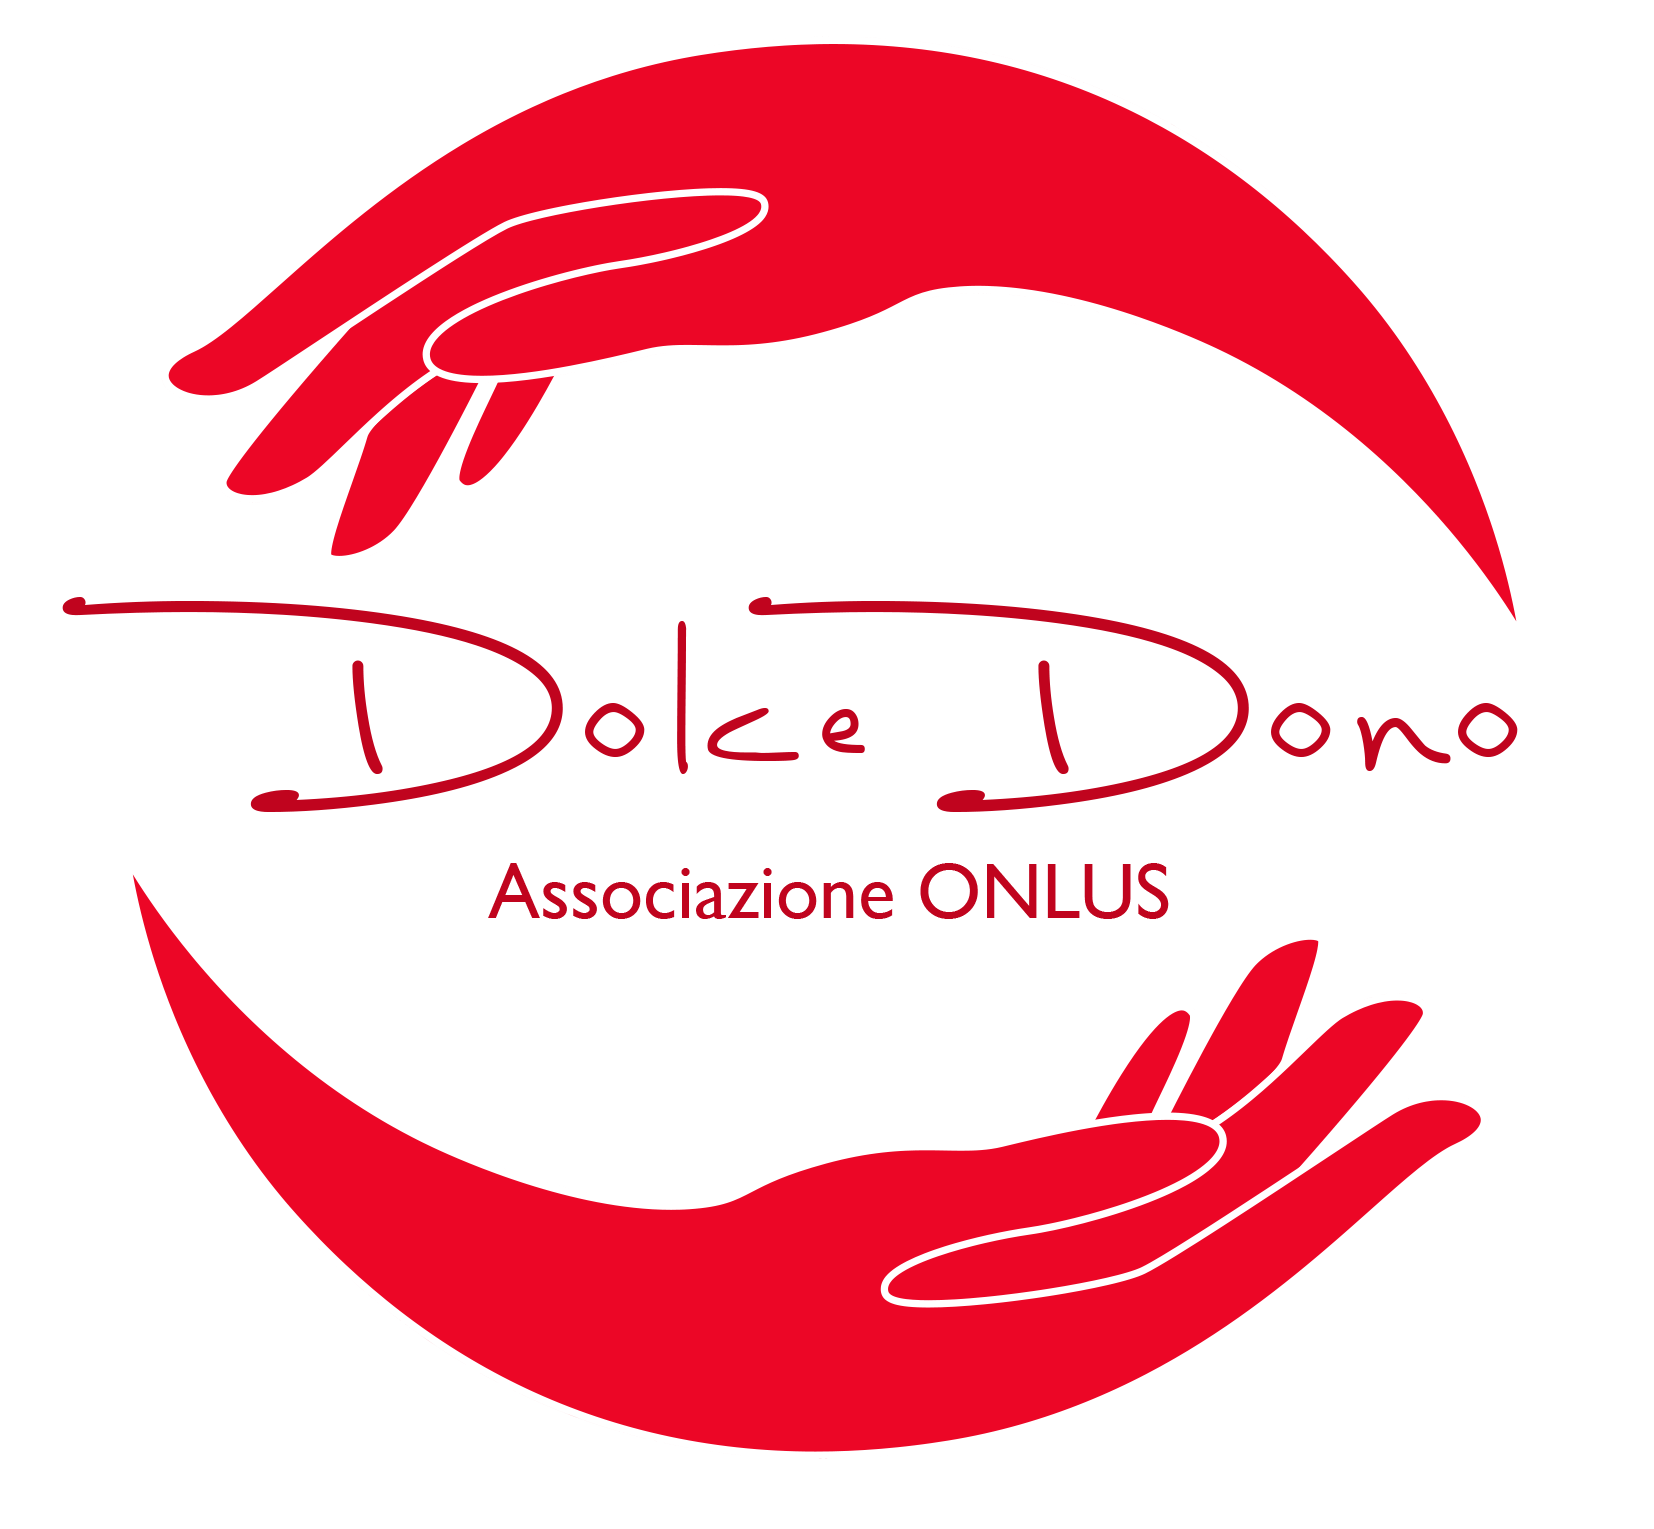 Dolce Dono ONLUS